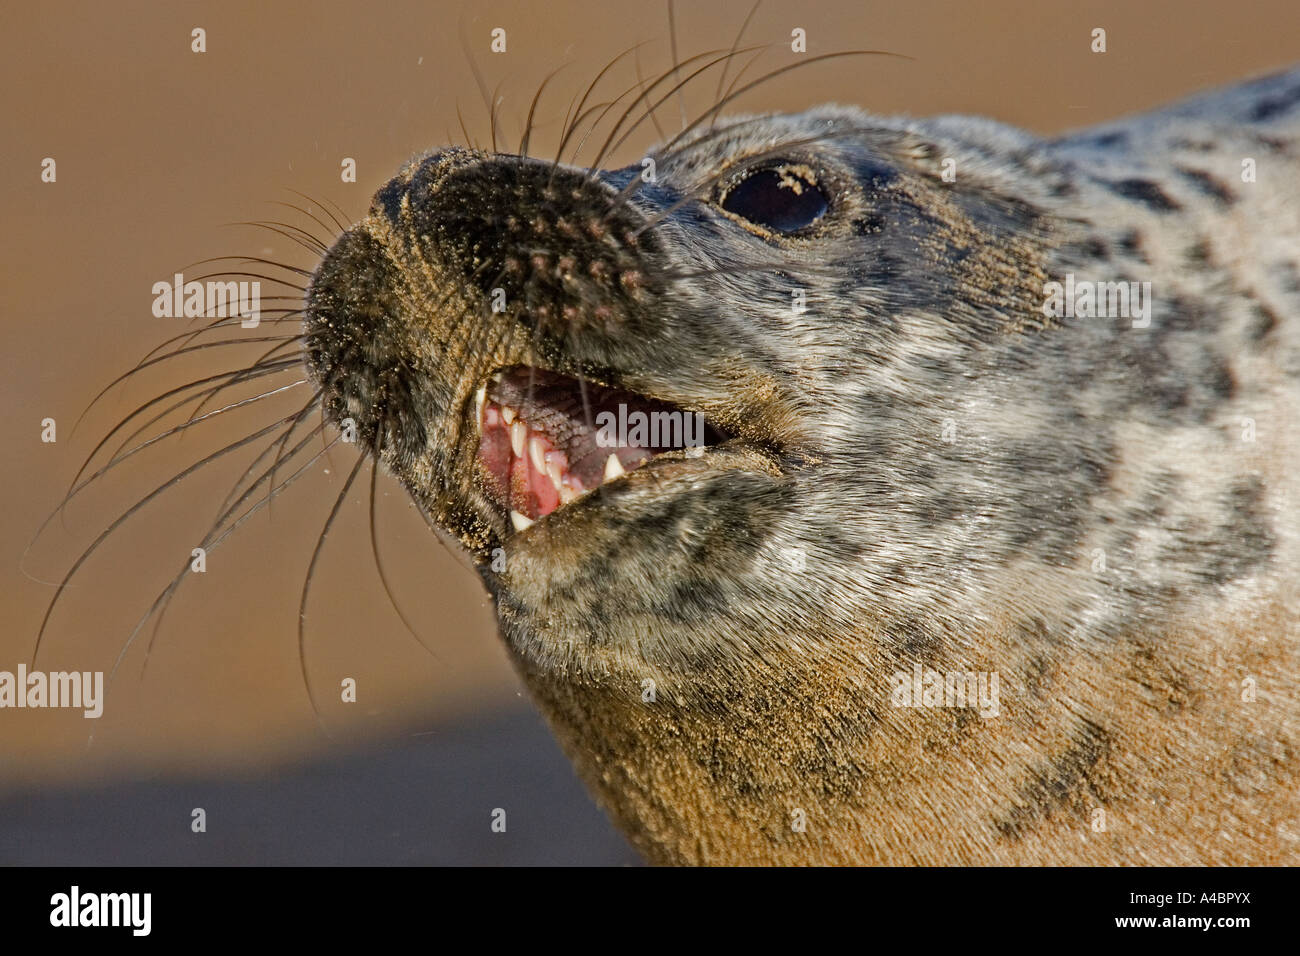 Atlantic seal pup in close-up Stock Photo